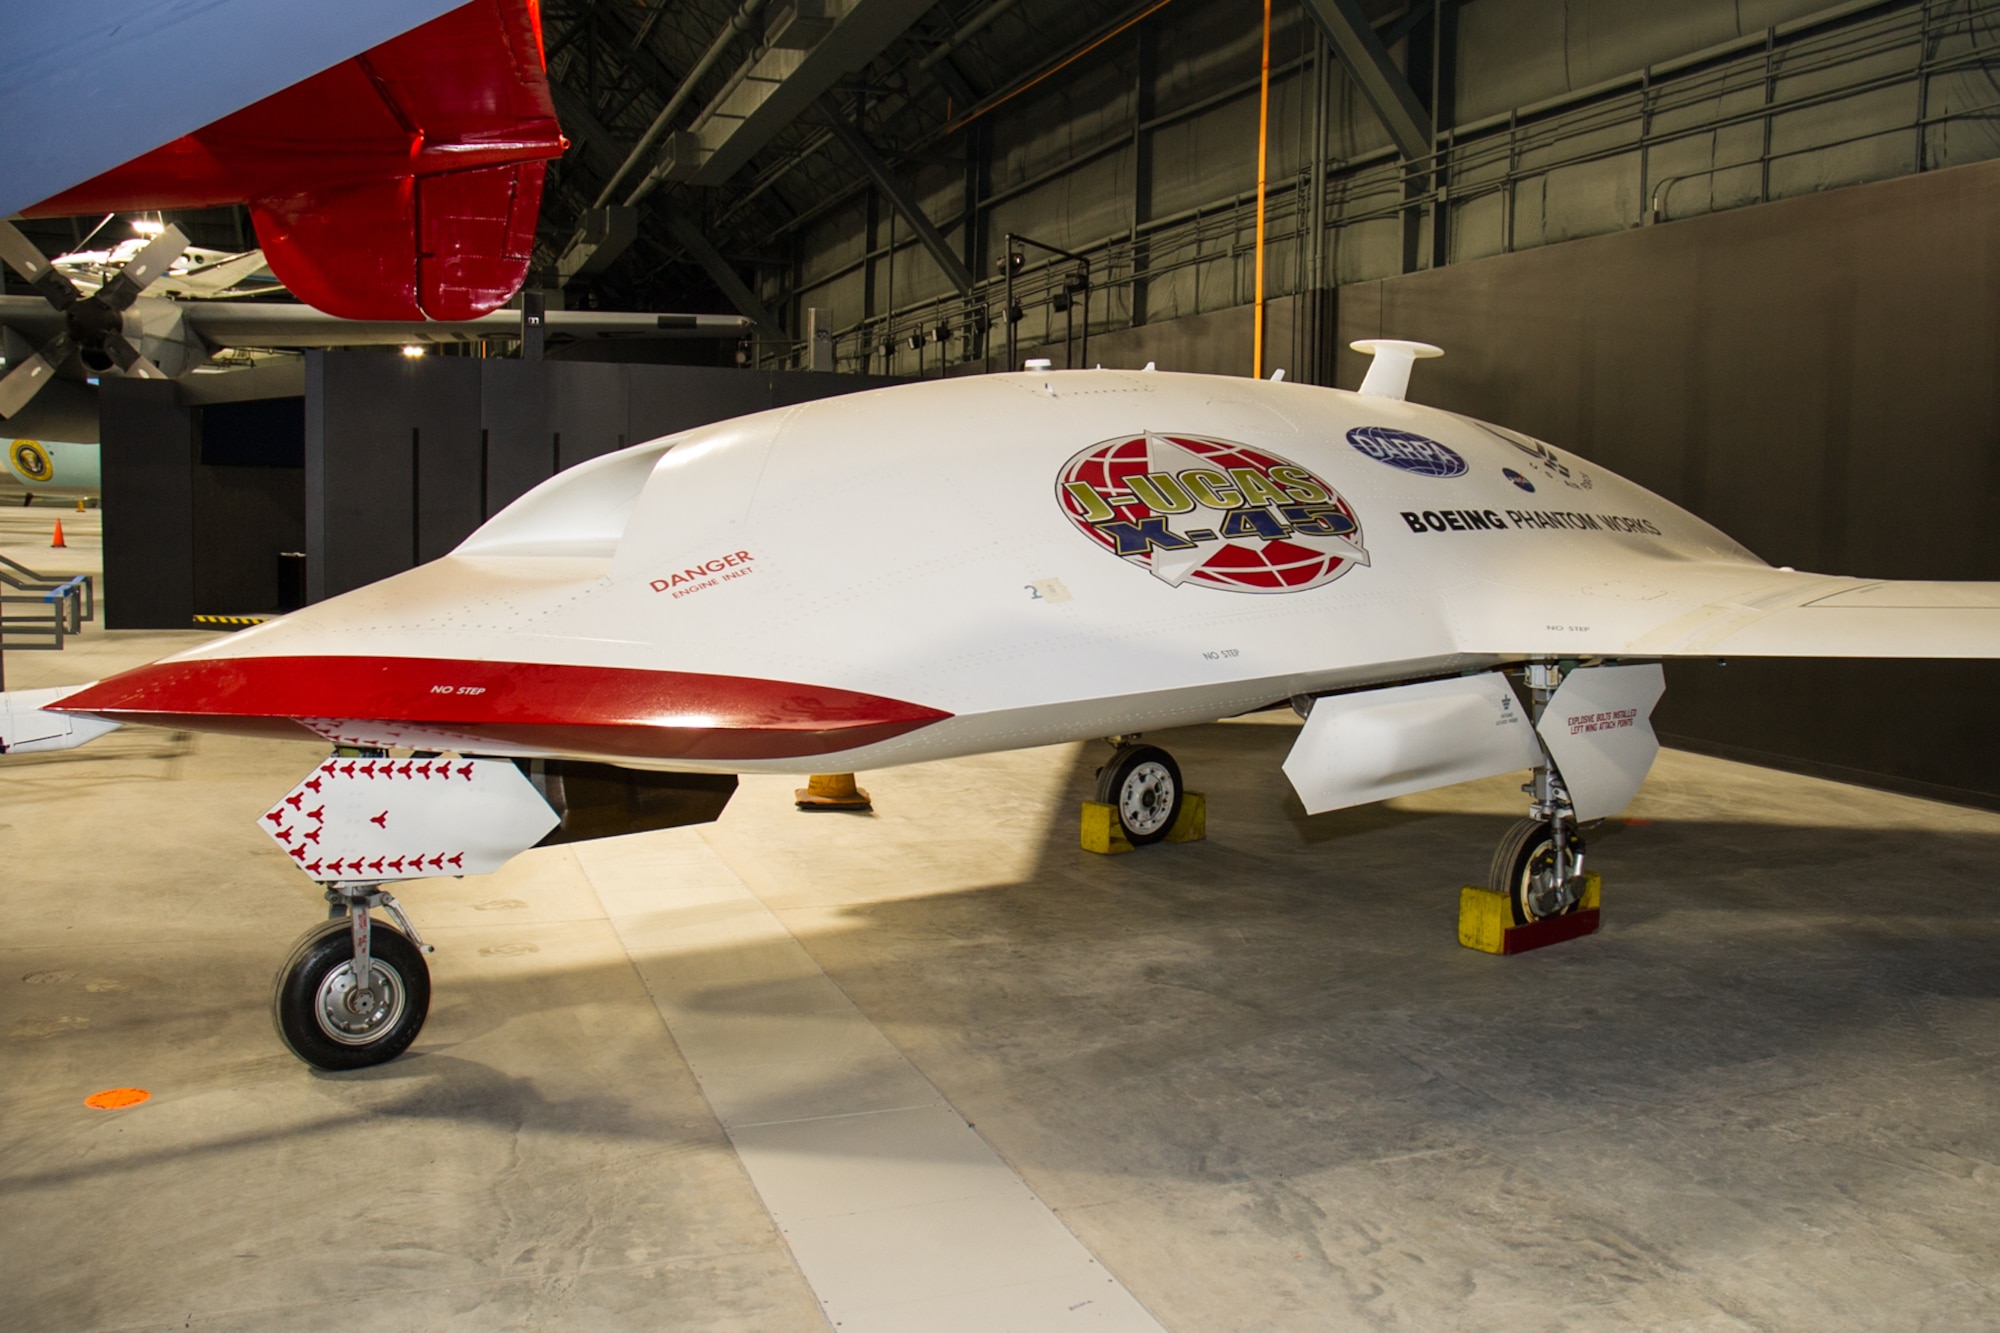 DAYTON, Ohio -- Boeing X-45A J-UCAS on display in the Research and Development Gallery at the National Museum of the United States Air Force. (U.S. Air Force photo)
